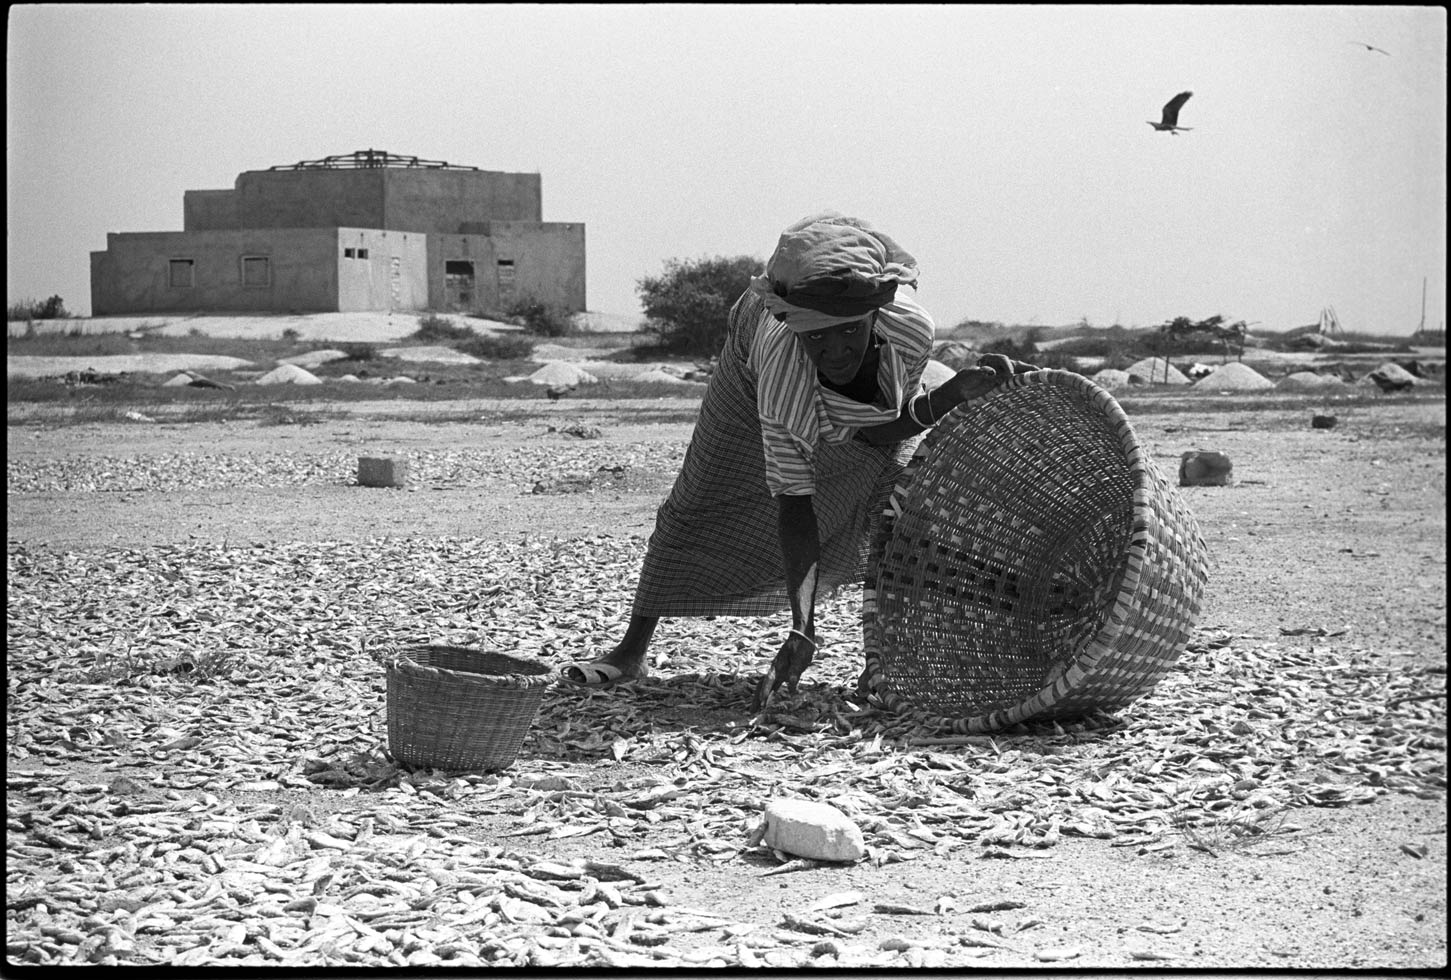 "If you are going to ask from God, take a large basket." Nigerian proverb

A woman dries fish on the beach to sell in the market. The women formed a cooperative to build a fish-processing center where they can dry fish in a more sanitary way and increase their production. 

Mbao, Senegal, 1988